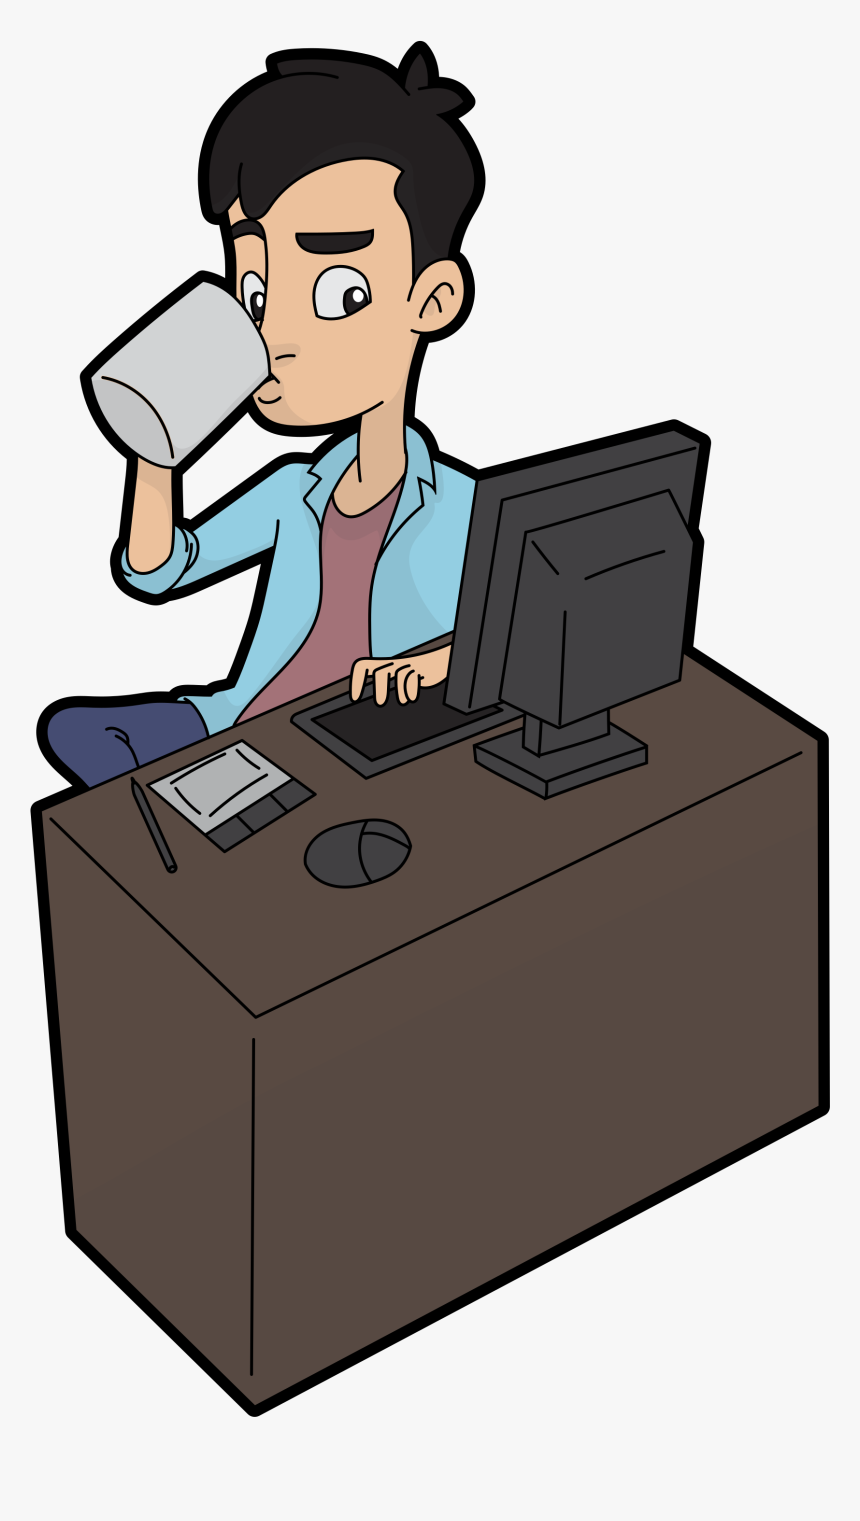 Cartoon Guy Drinks While Using A Computer Clipart Guy On Computer Cartoon Hd Png Download Kindpng